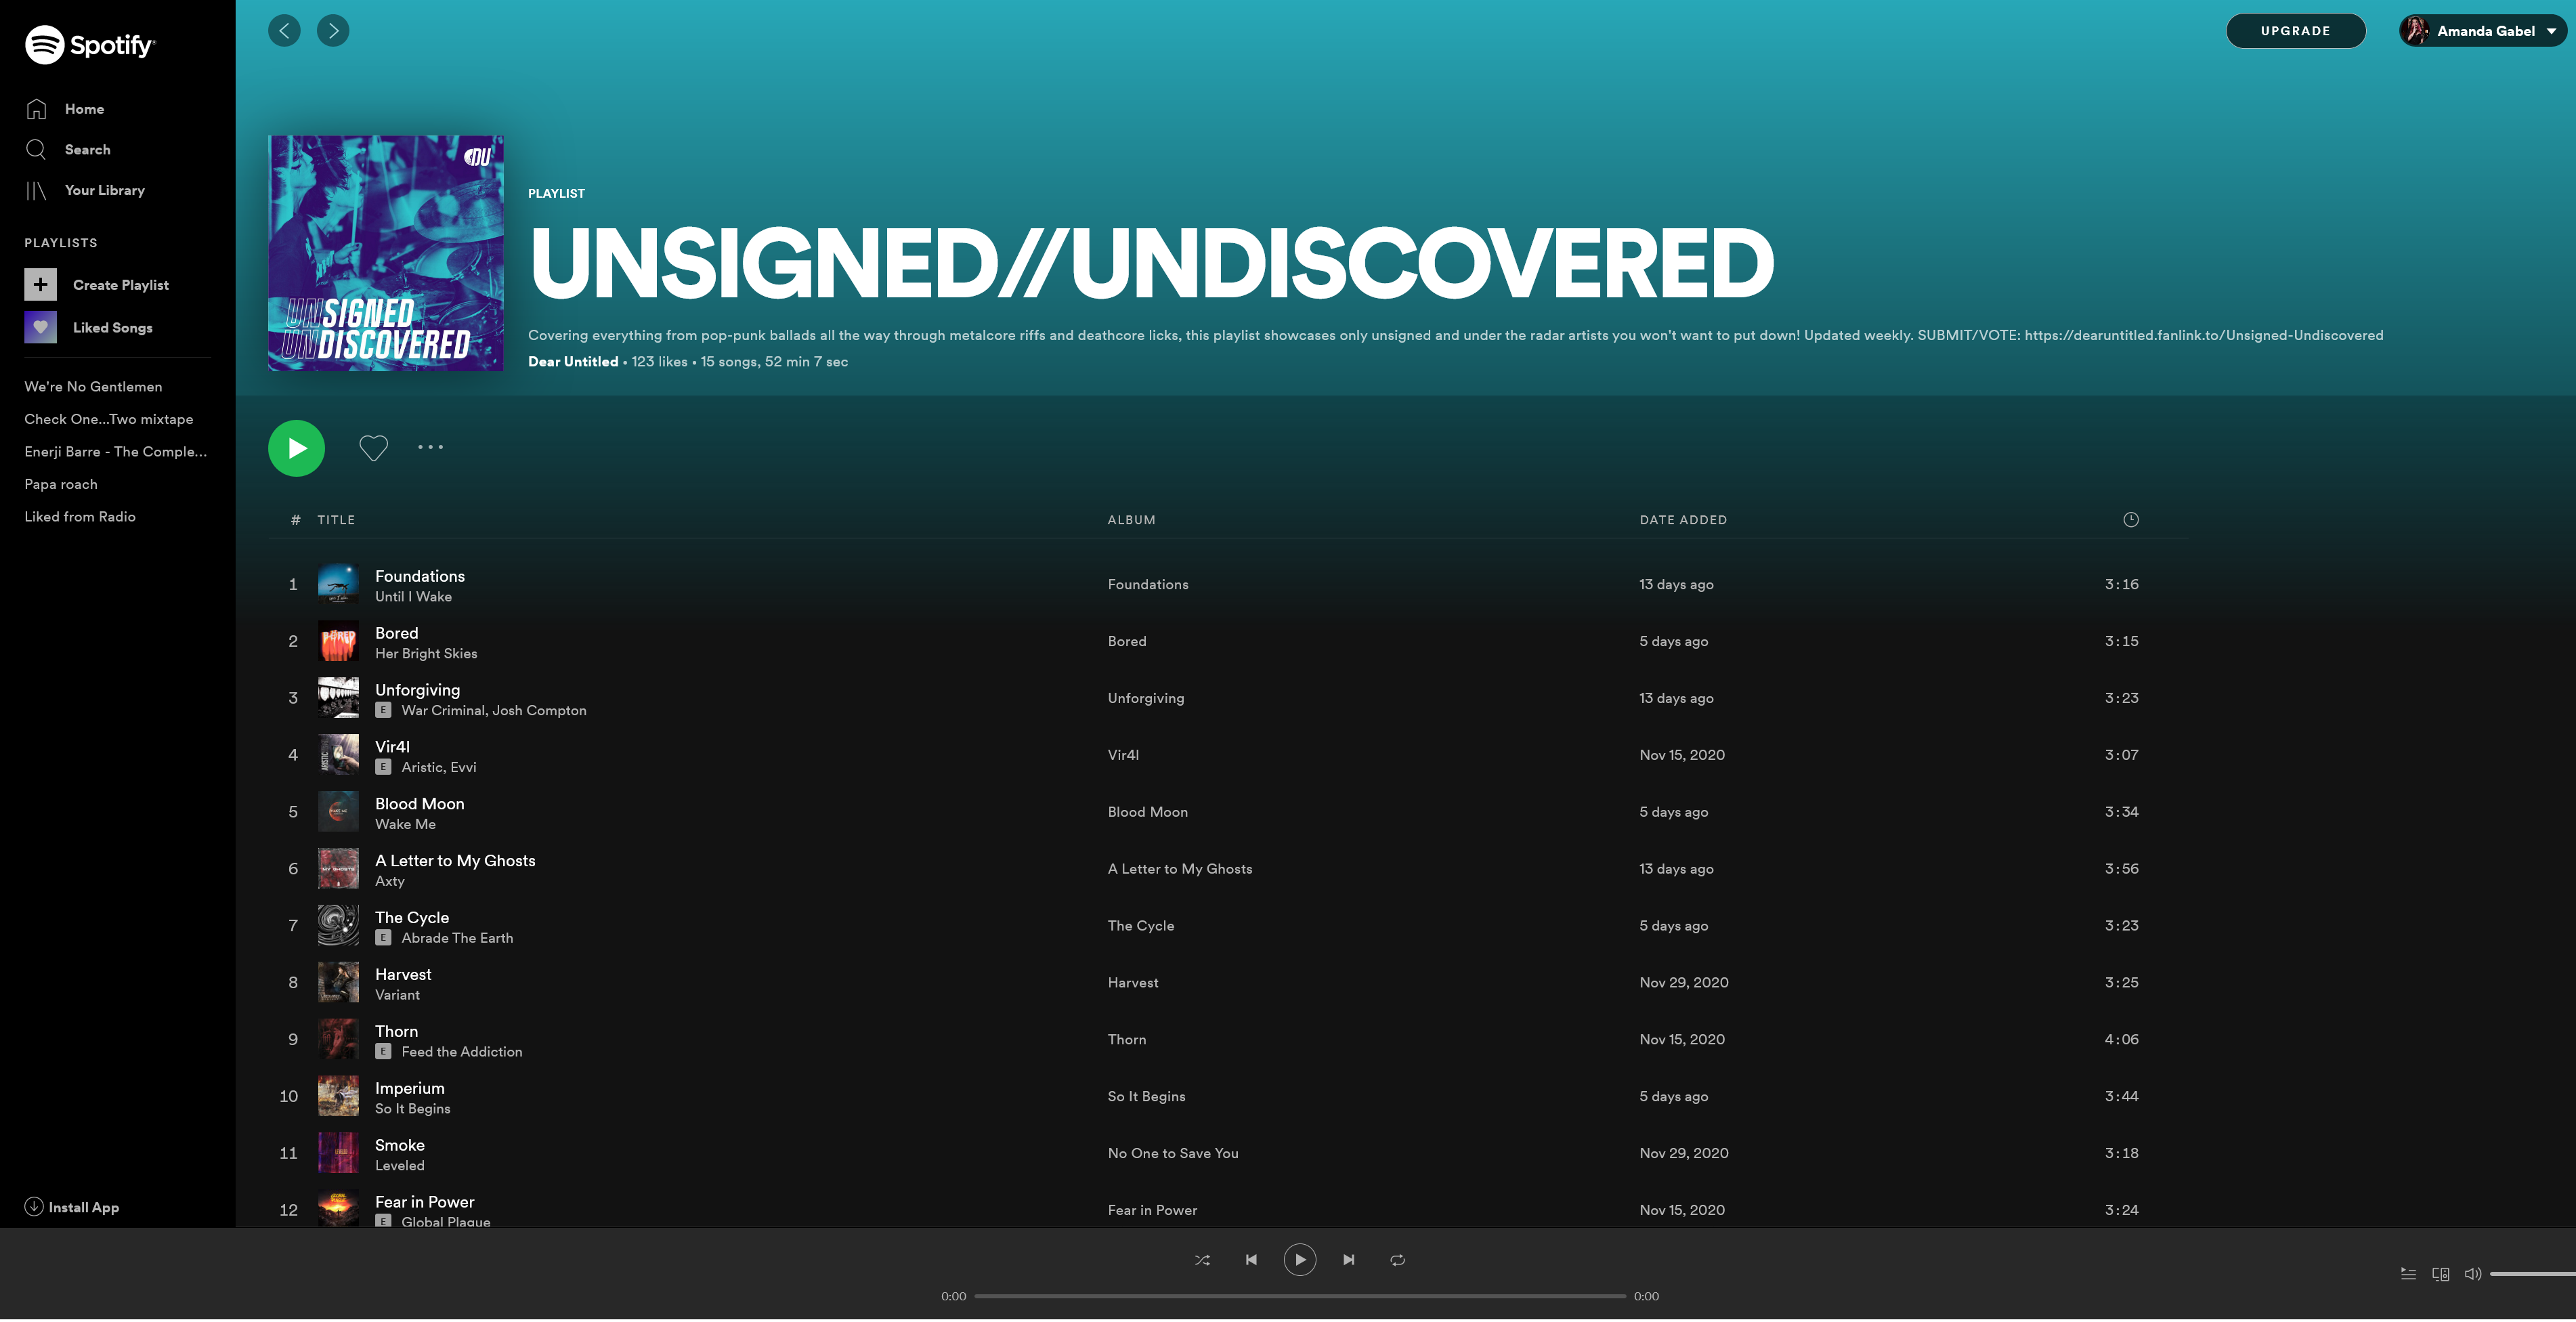 Spotify – UNSIGNED UNDISCOVERED